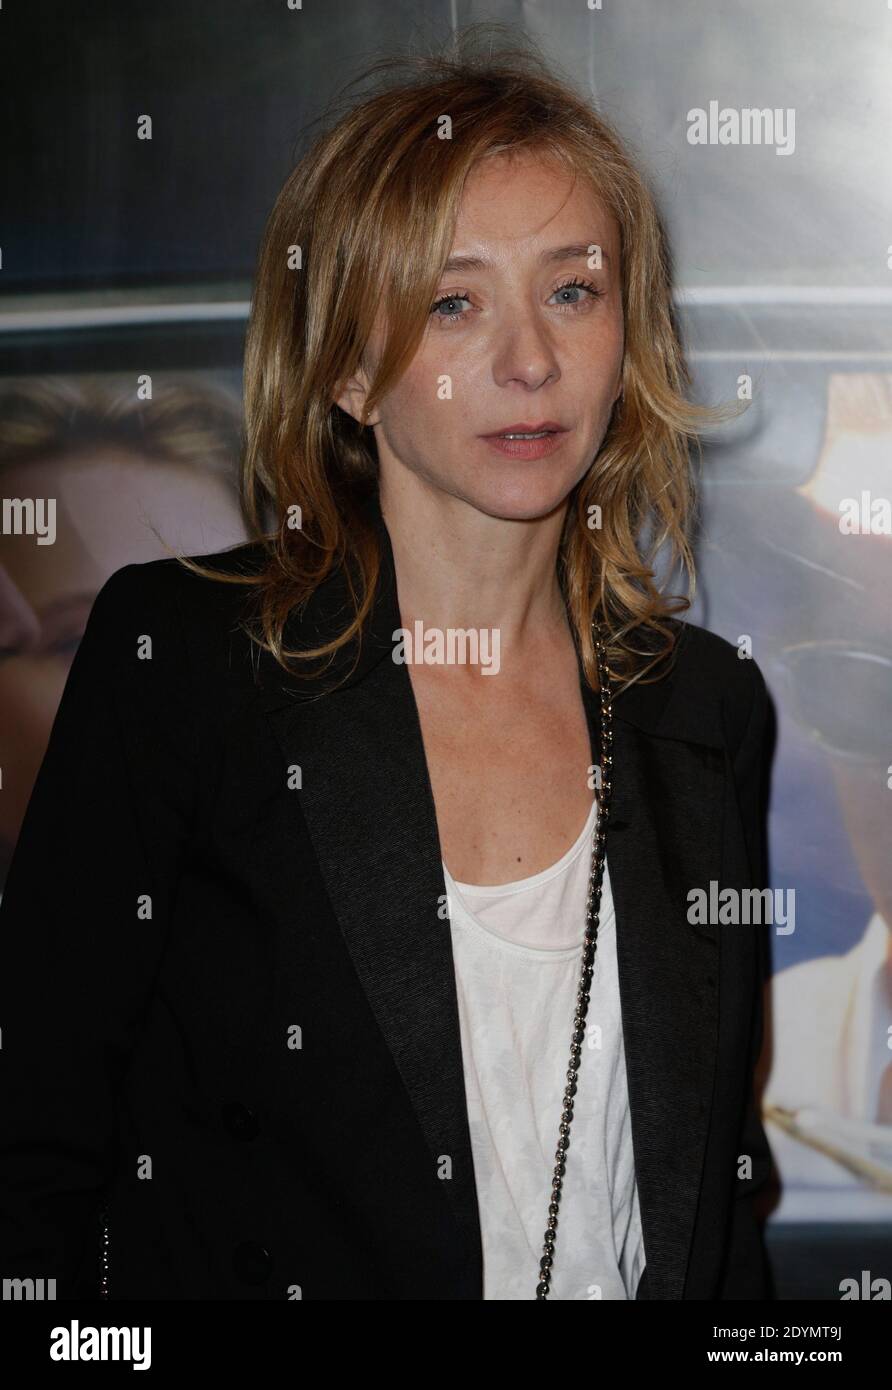 Sylvie Testud attending the premiere of 'Pour Une femme' held at Publicis cinema in Paris, France on June 24, 2013. Photo by Jerome Domine/ABACAPRESS.COM Stock Photo